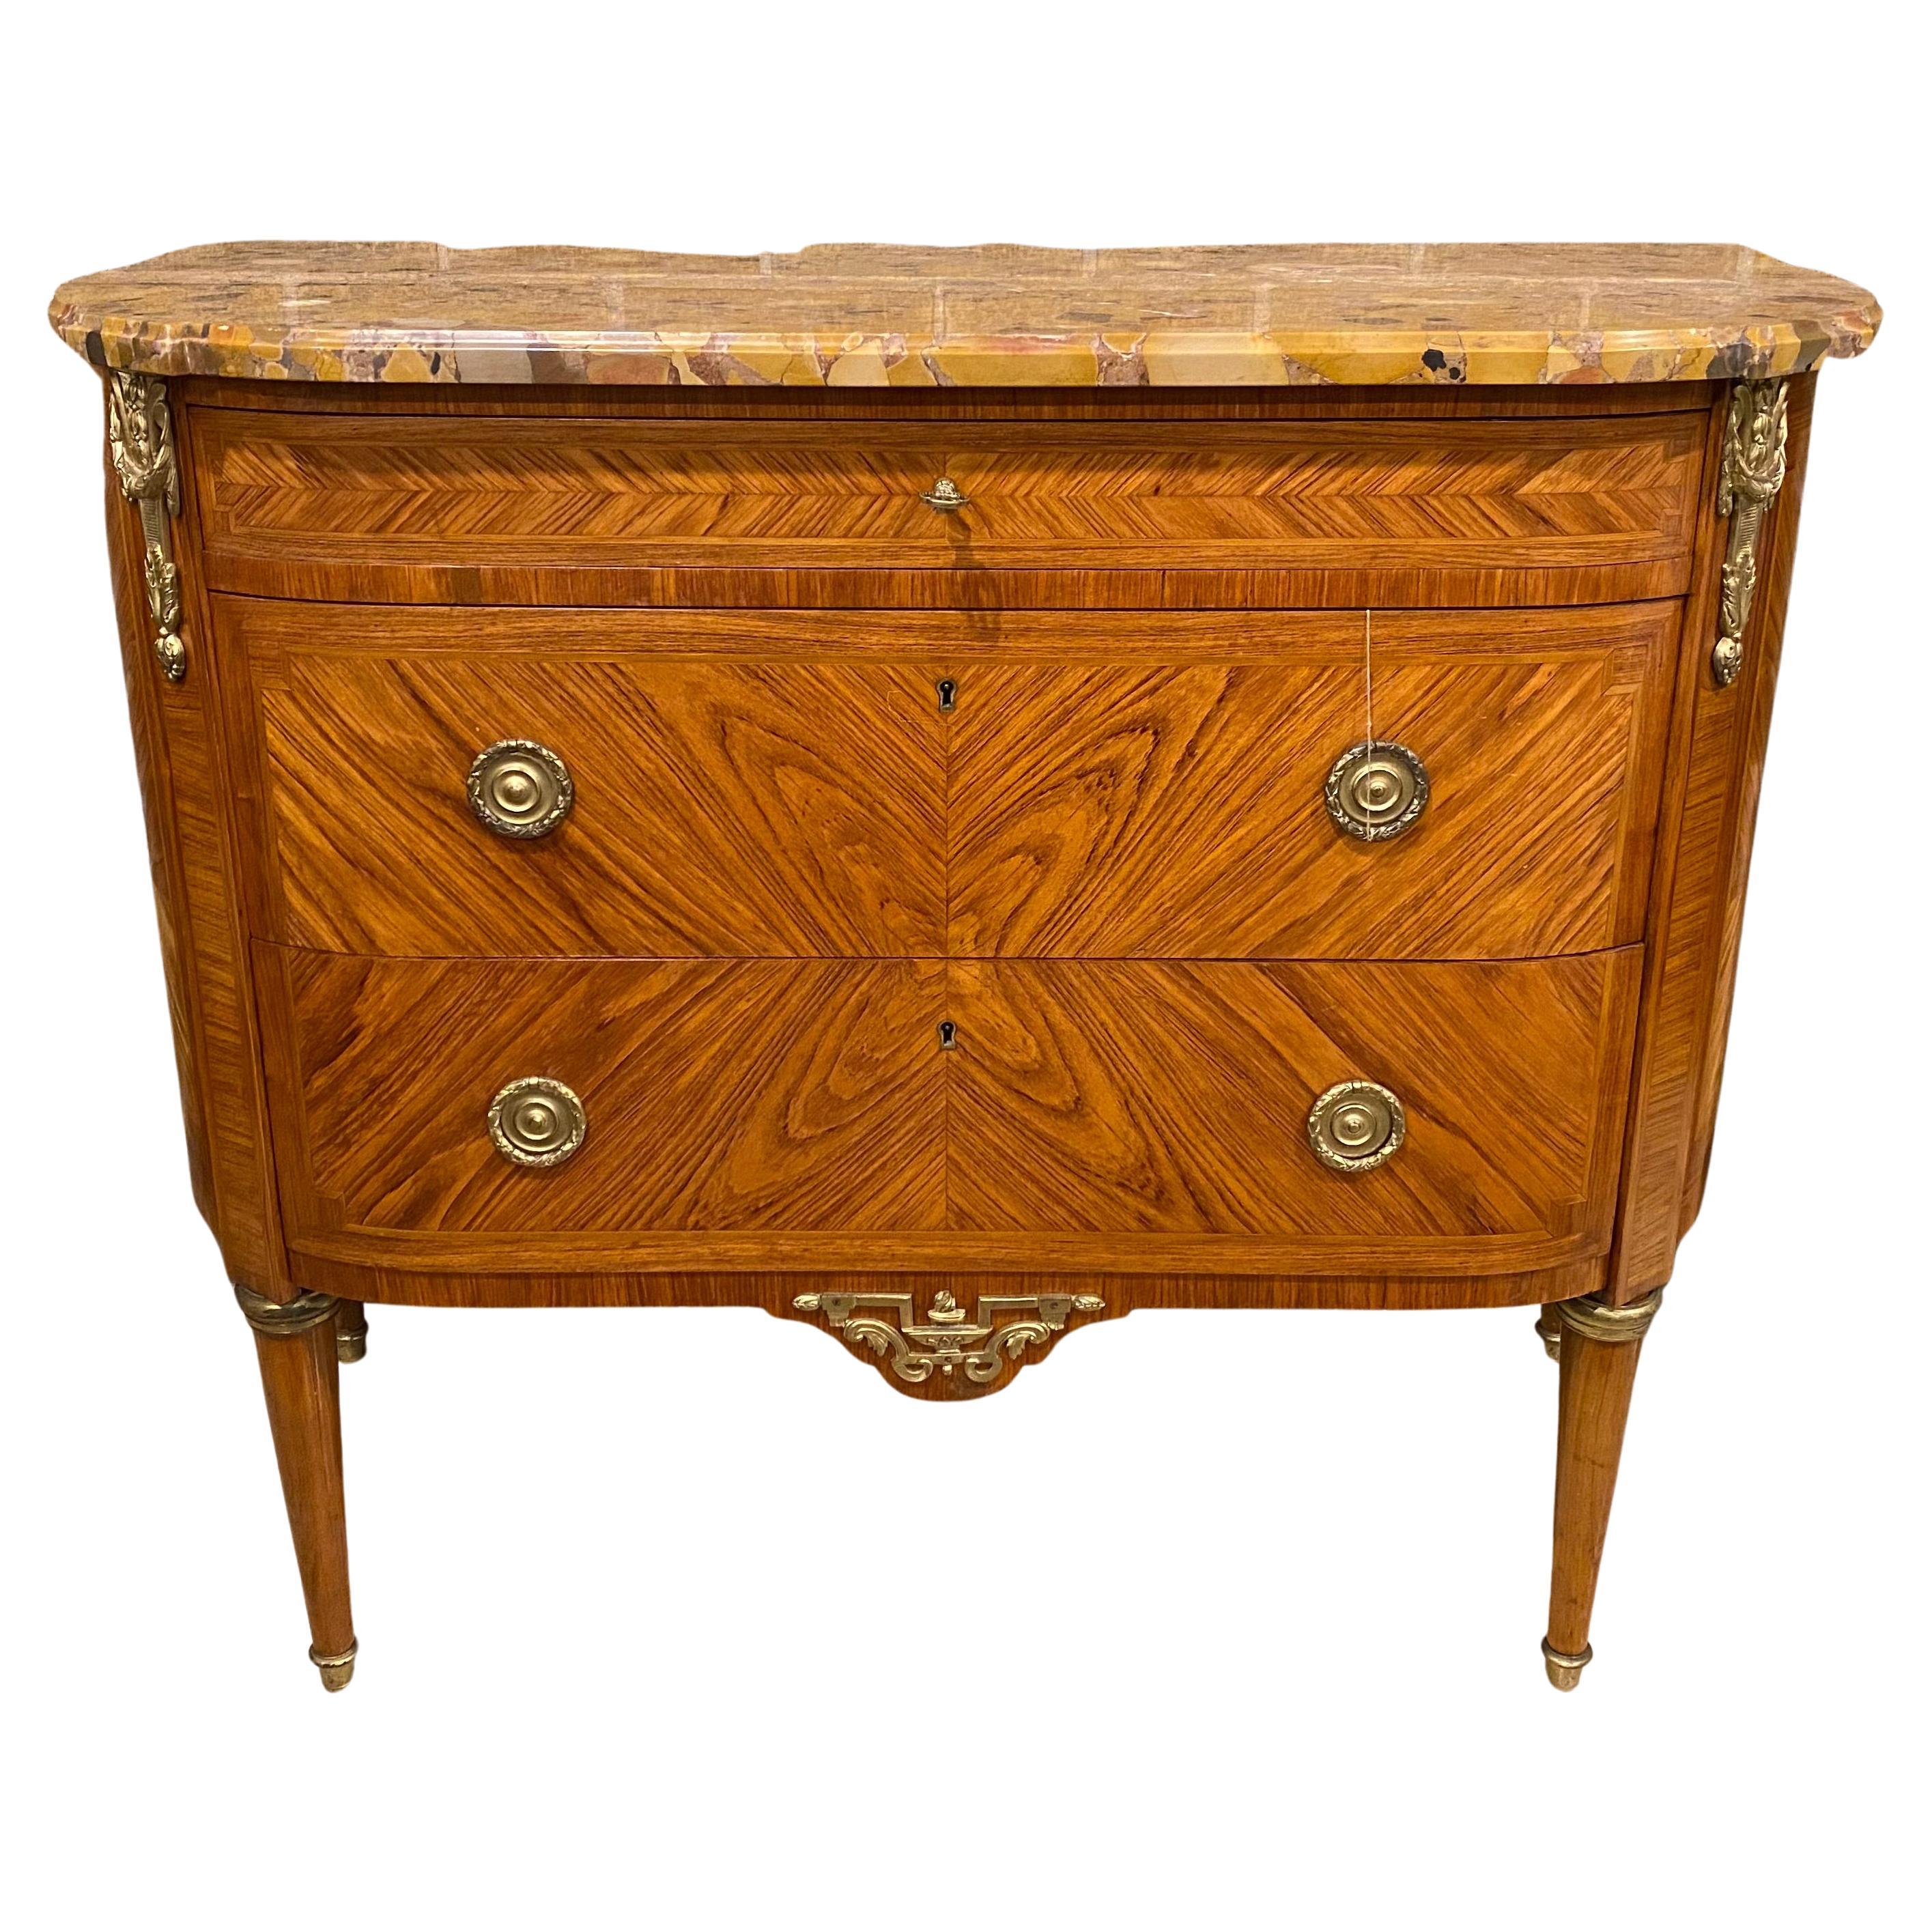 Louis XVI Style Marble Top Demi Lune shape Commode with Ormolu Accents